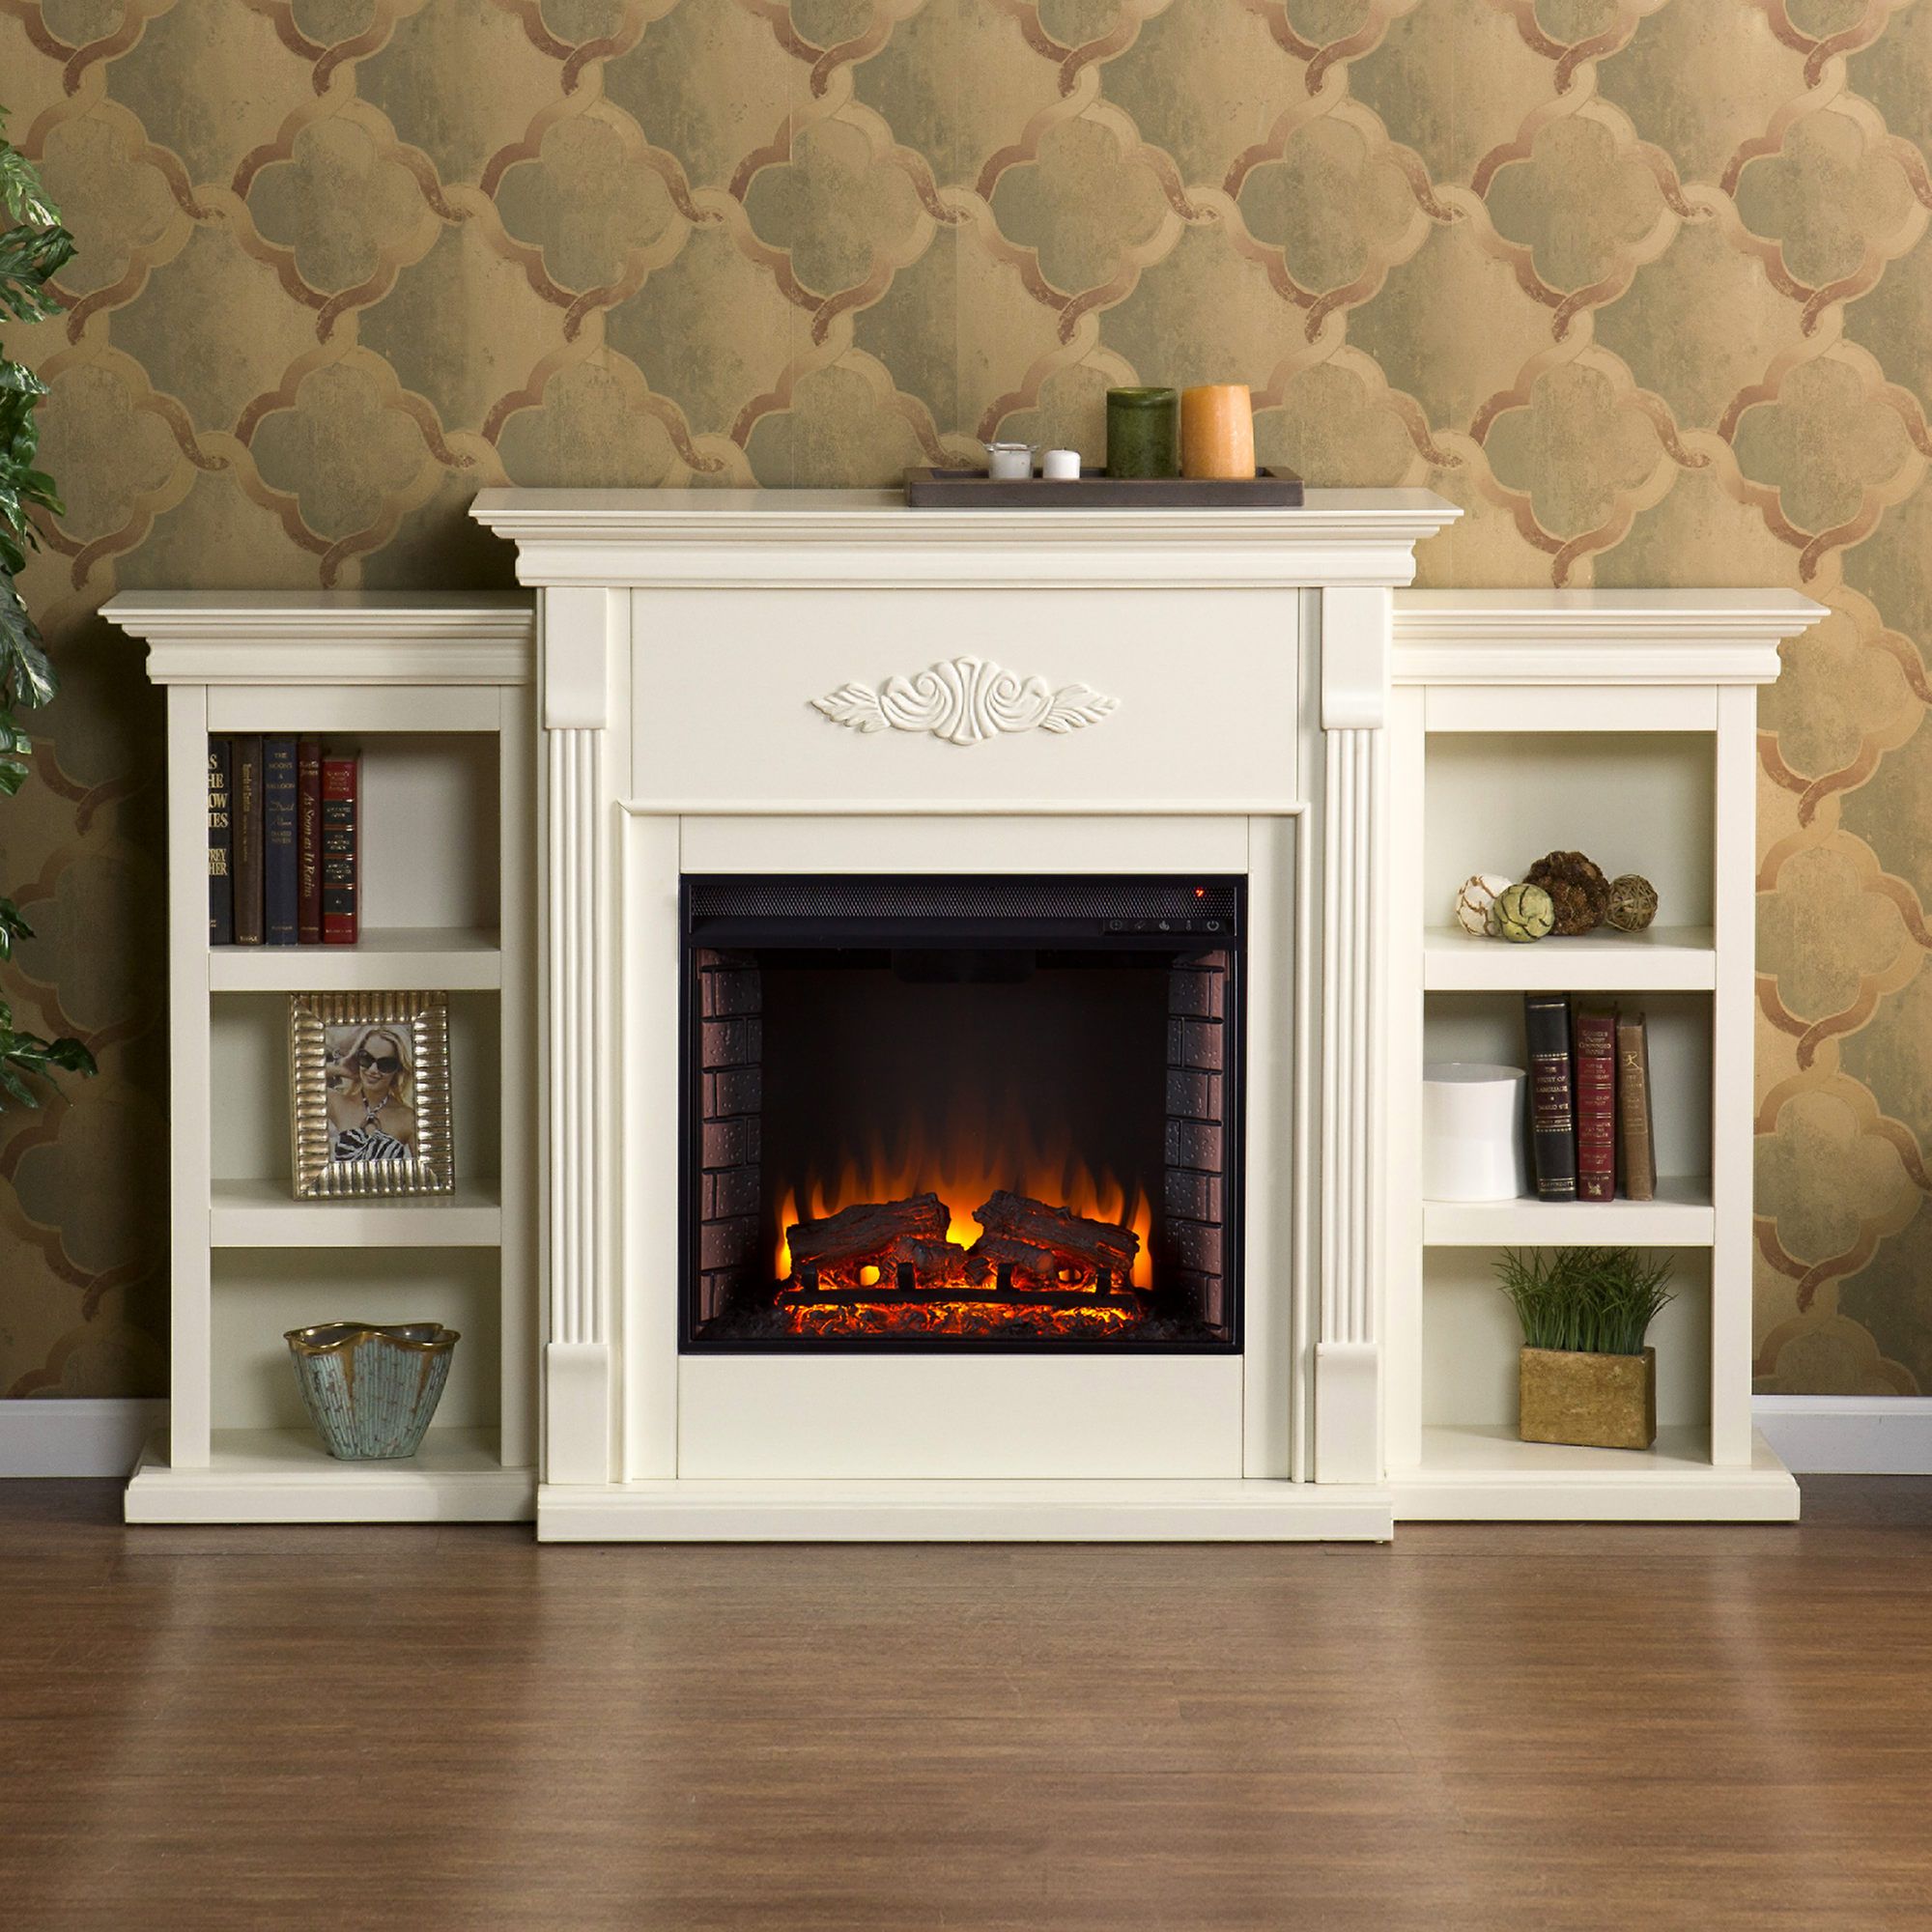 Fireplace with Bookshelves On Each Side Beautiful Sei Newport Electric Fireplace with Bookcases Ivory